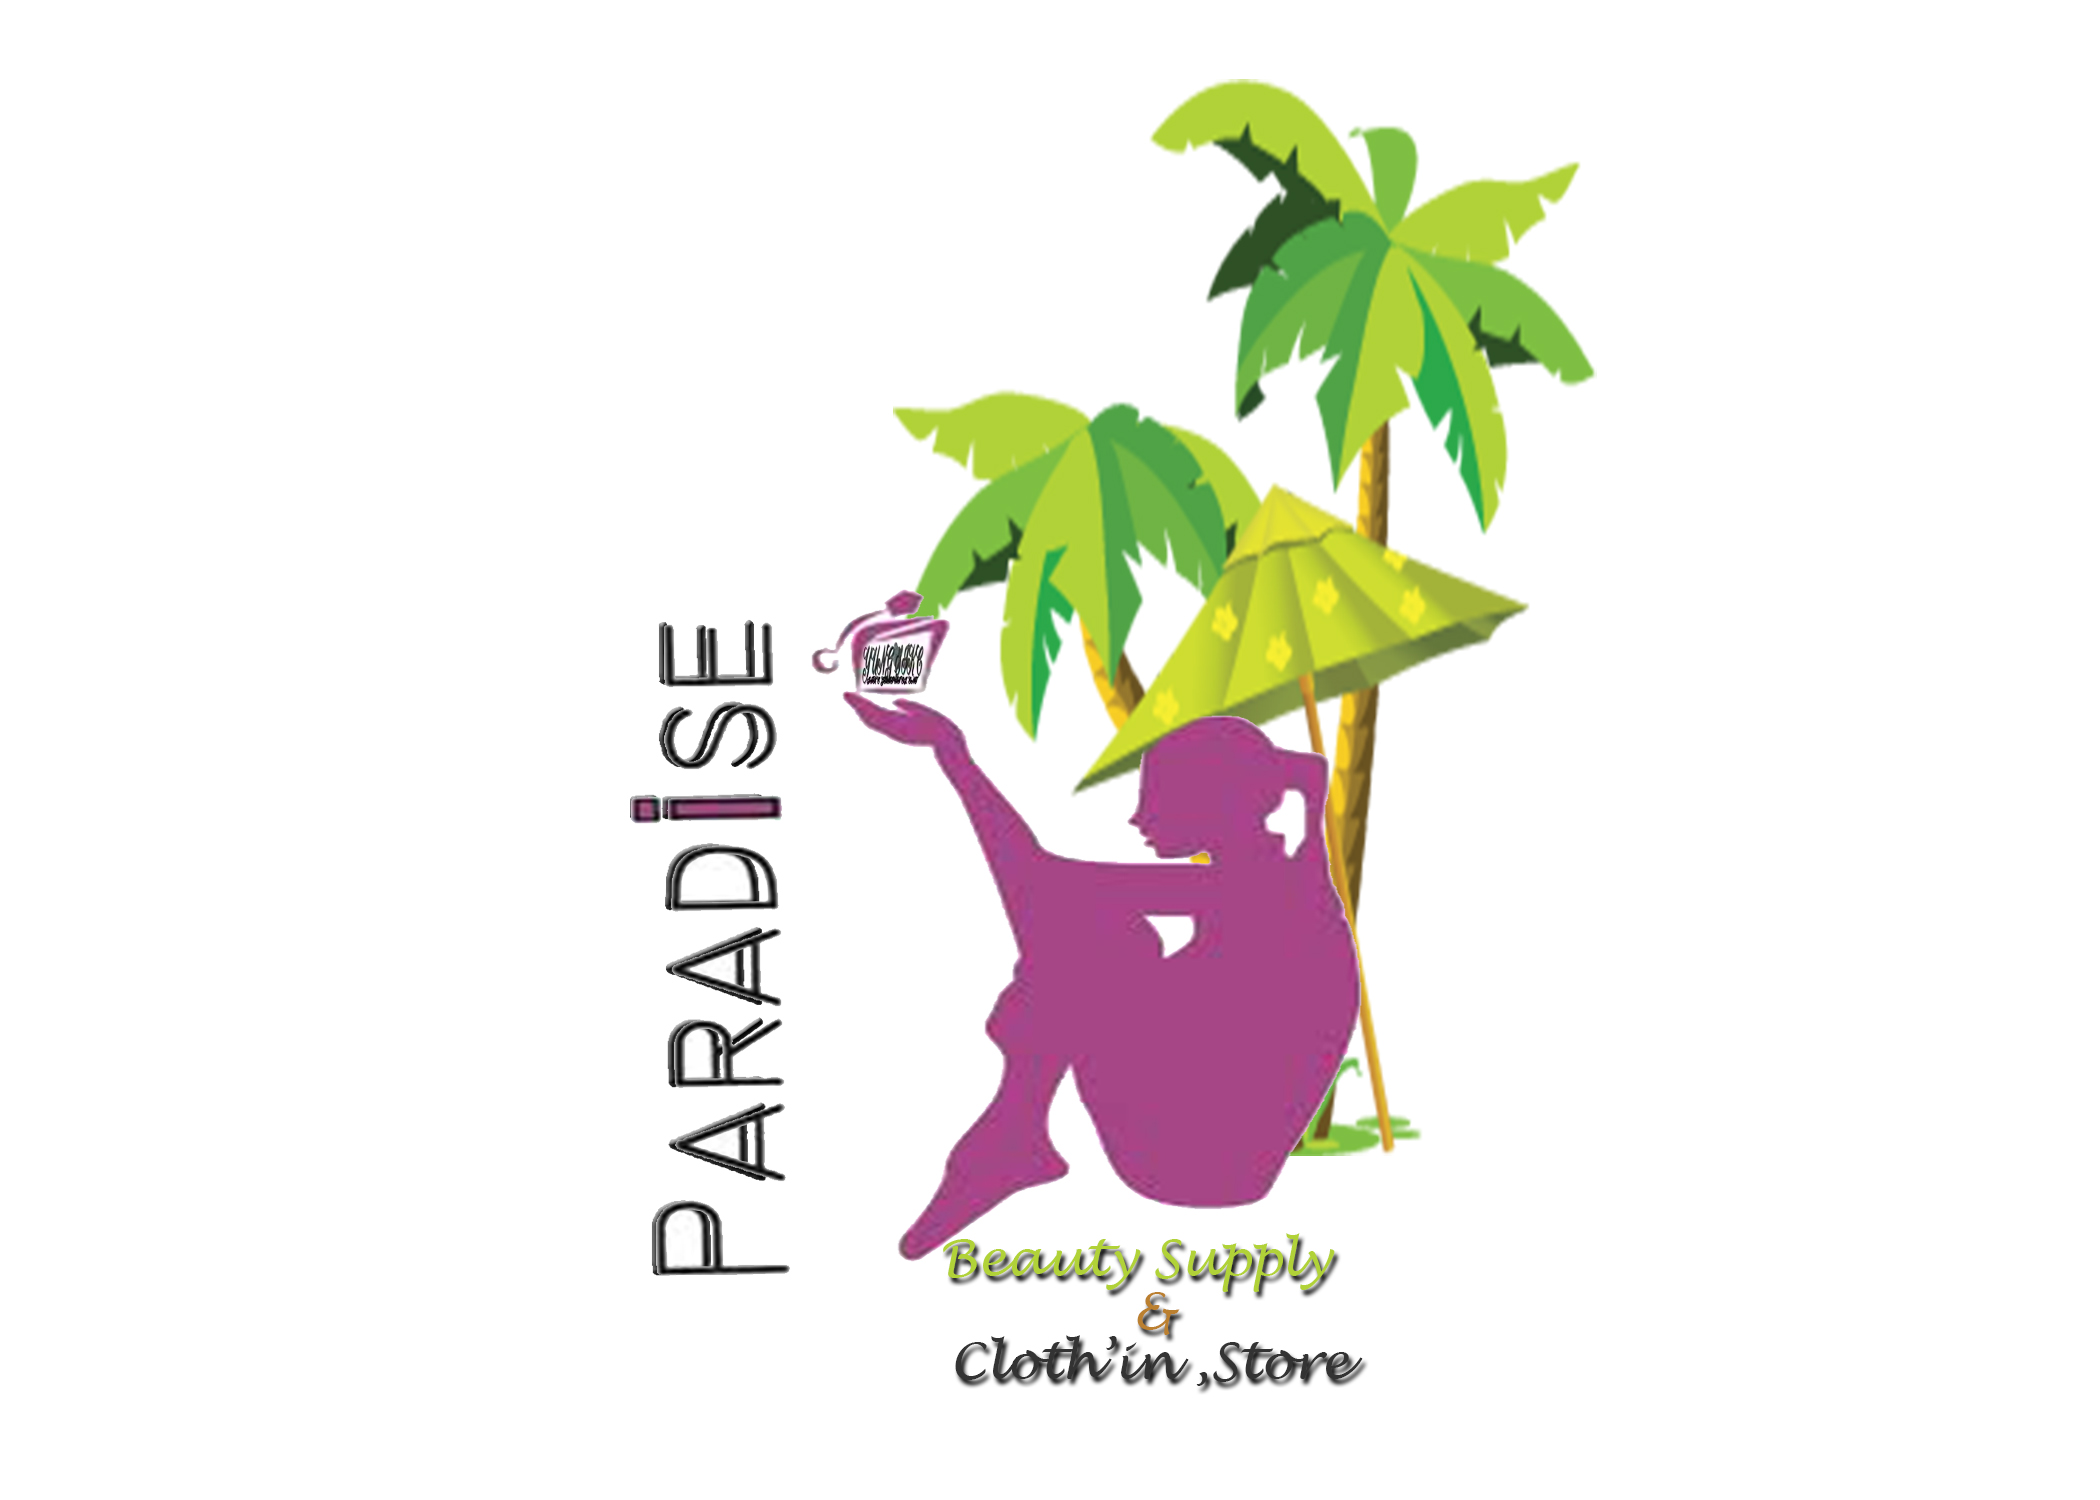 The Best Quality Clothing and Beauty Supplies For A Reasonable Price. –  Paradise Beauty Supply & Clothing Store LLC